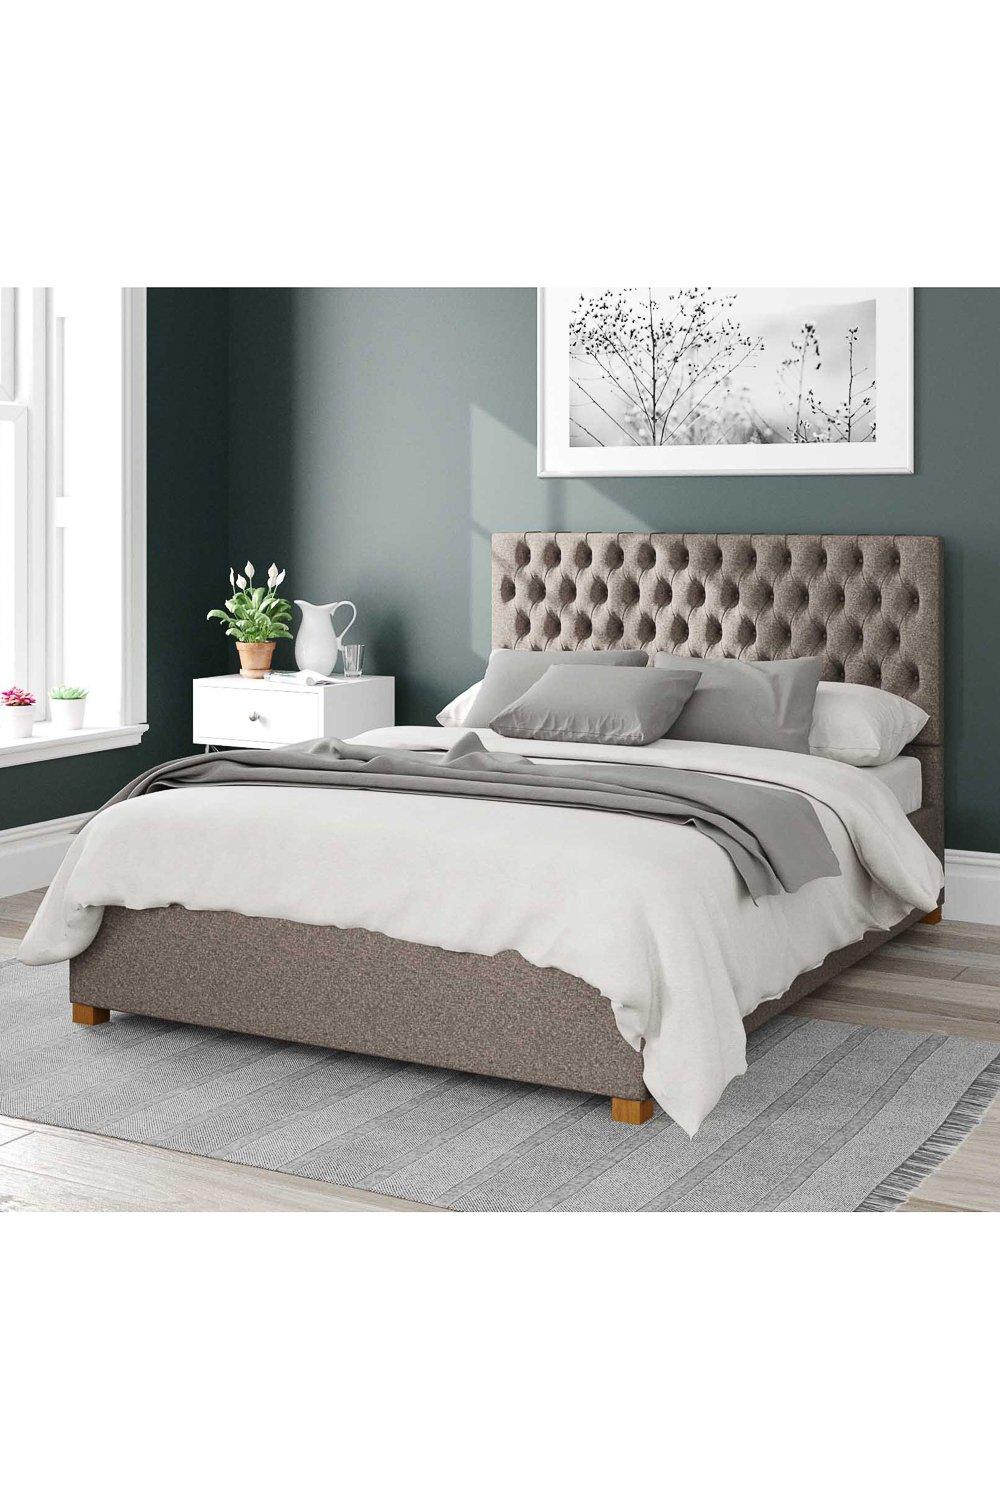 Nightingale Upholstered Ottoman Storage Bed, Yorkshire Knit Fabric